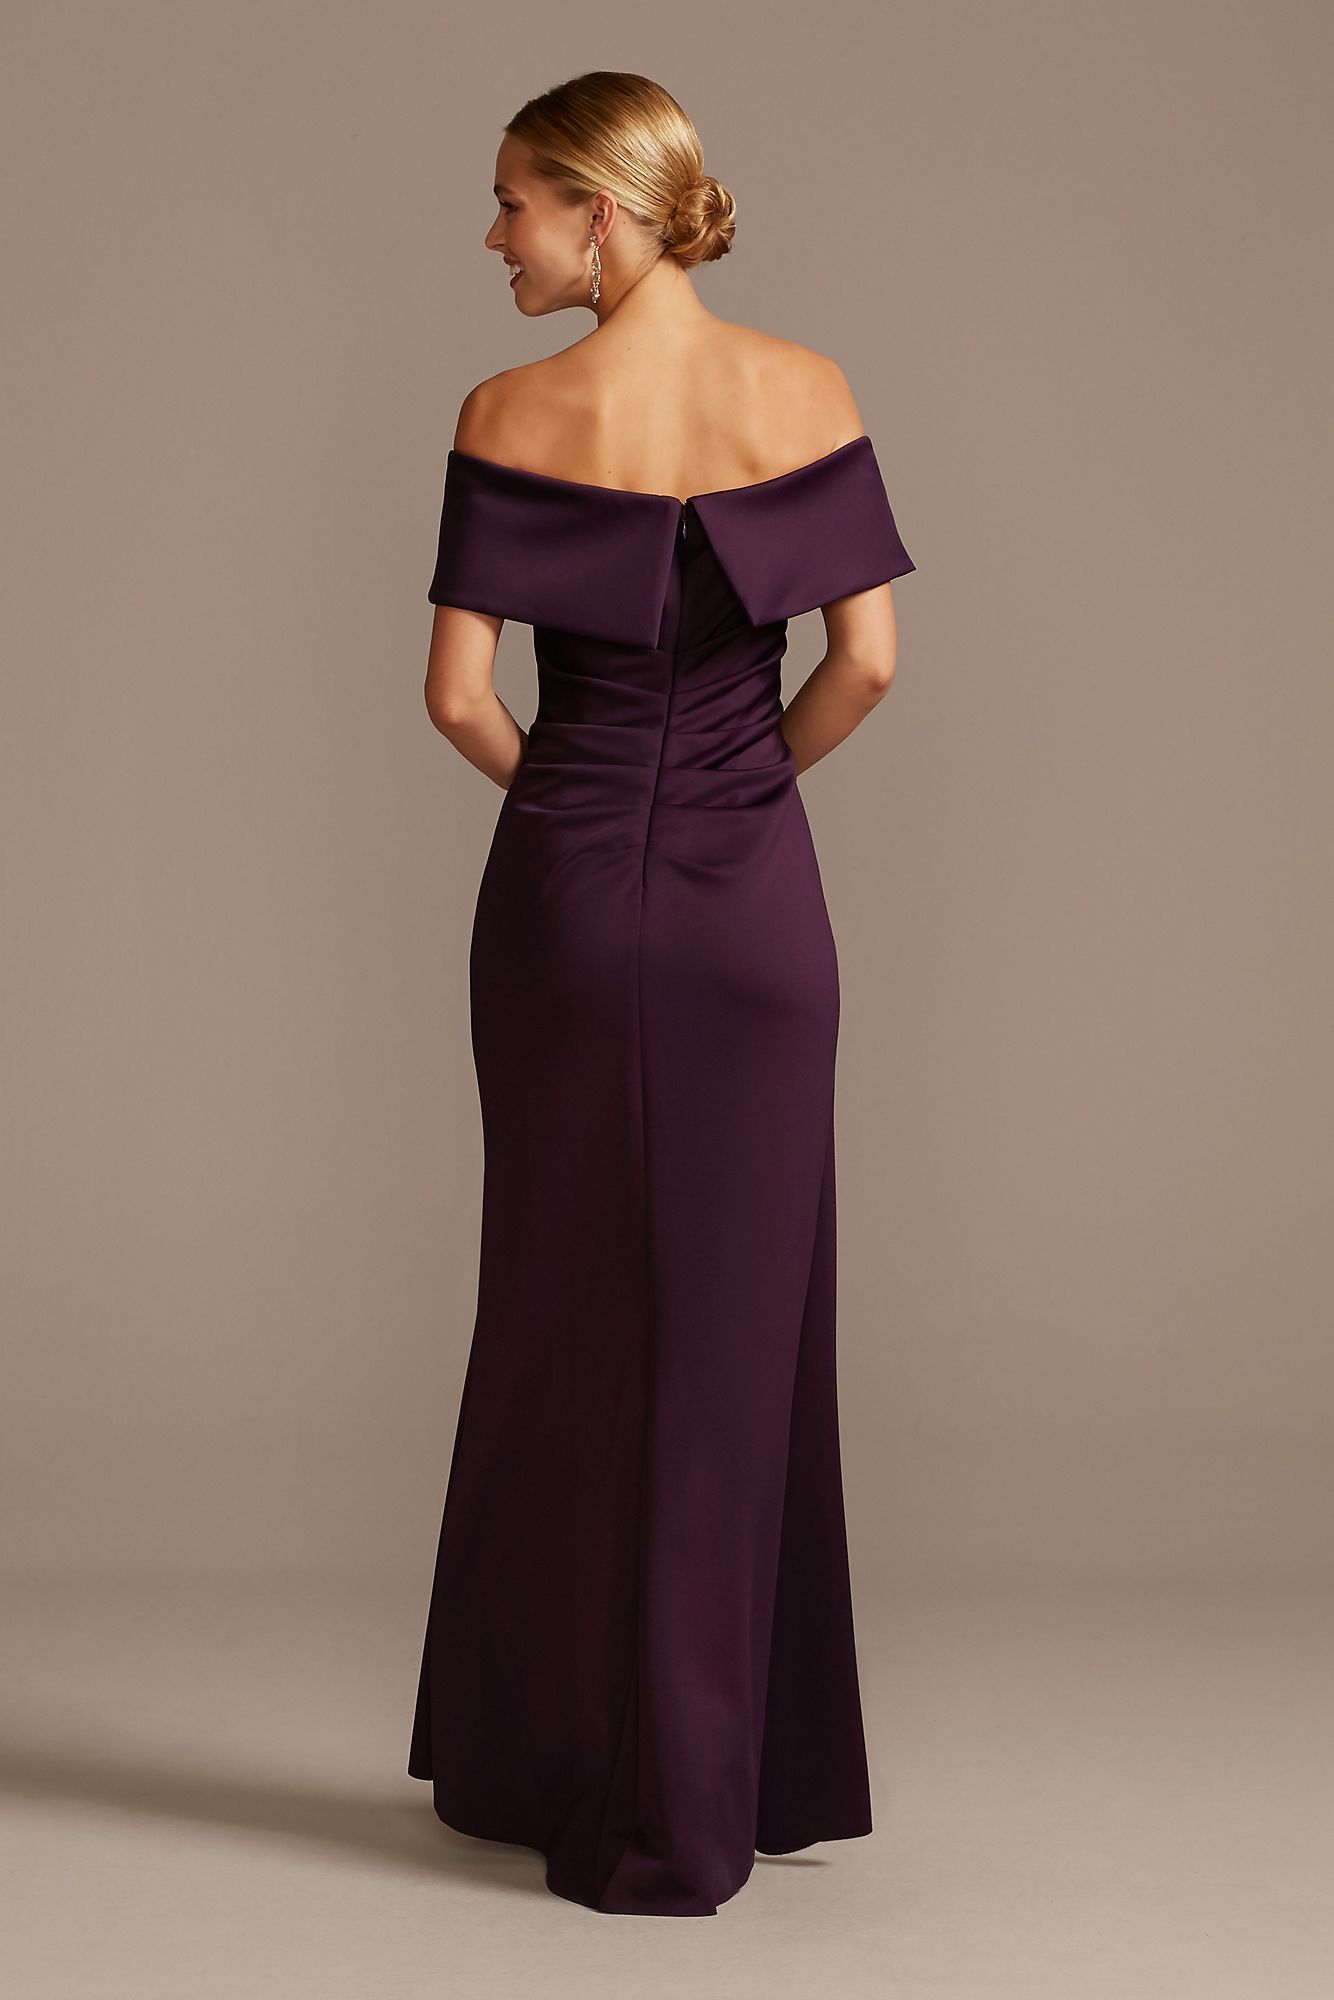 Off the Shoulder Ruched Gown with Hip Cascade 3008XD